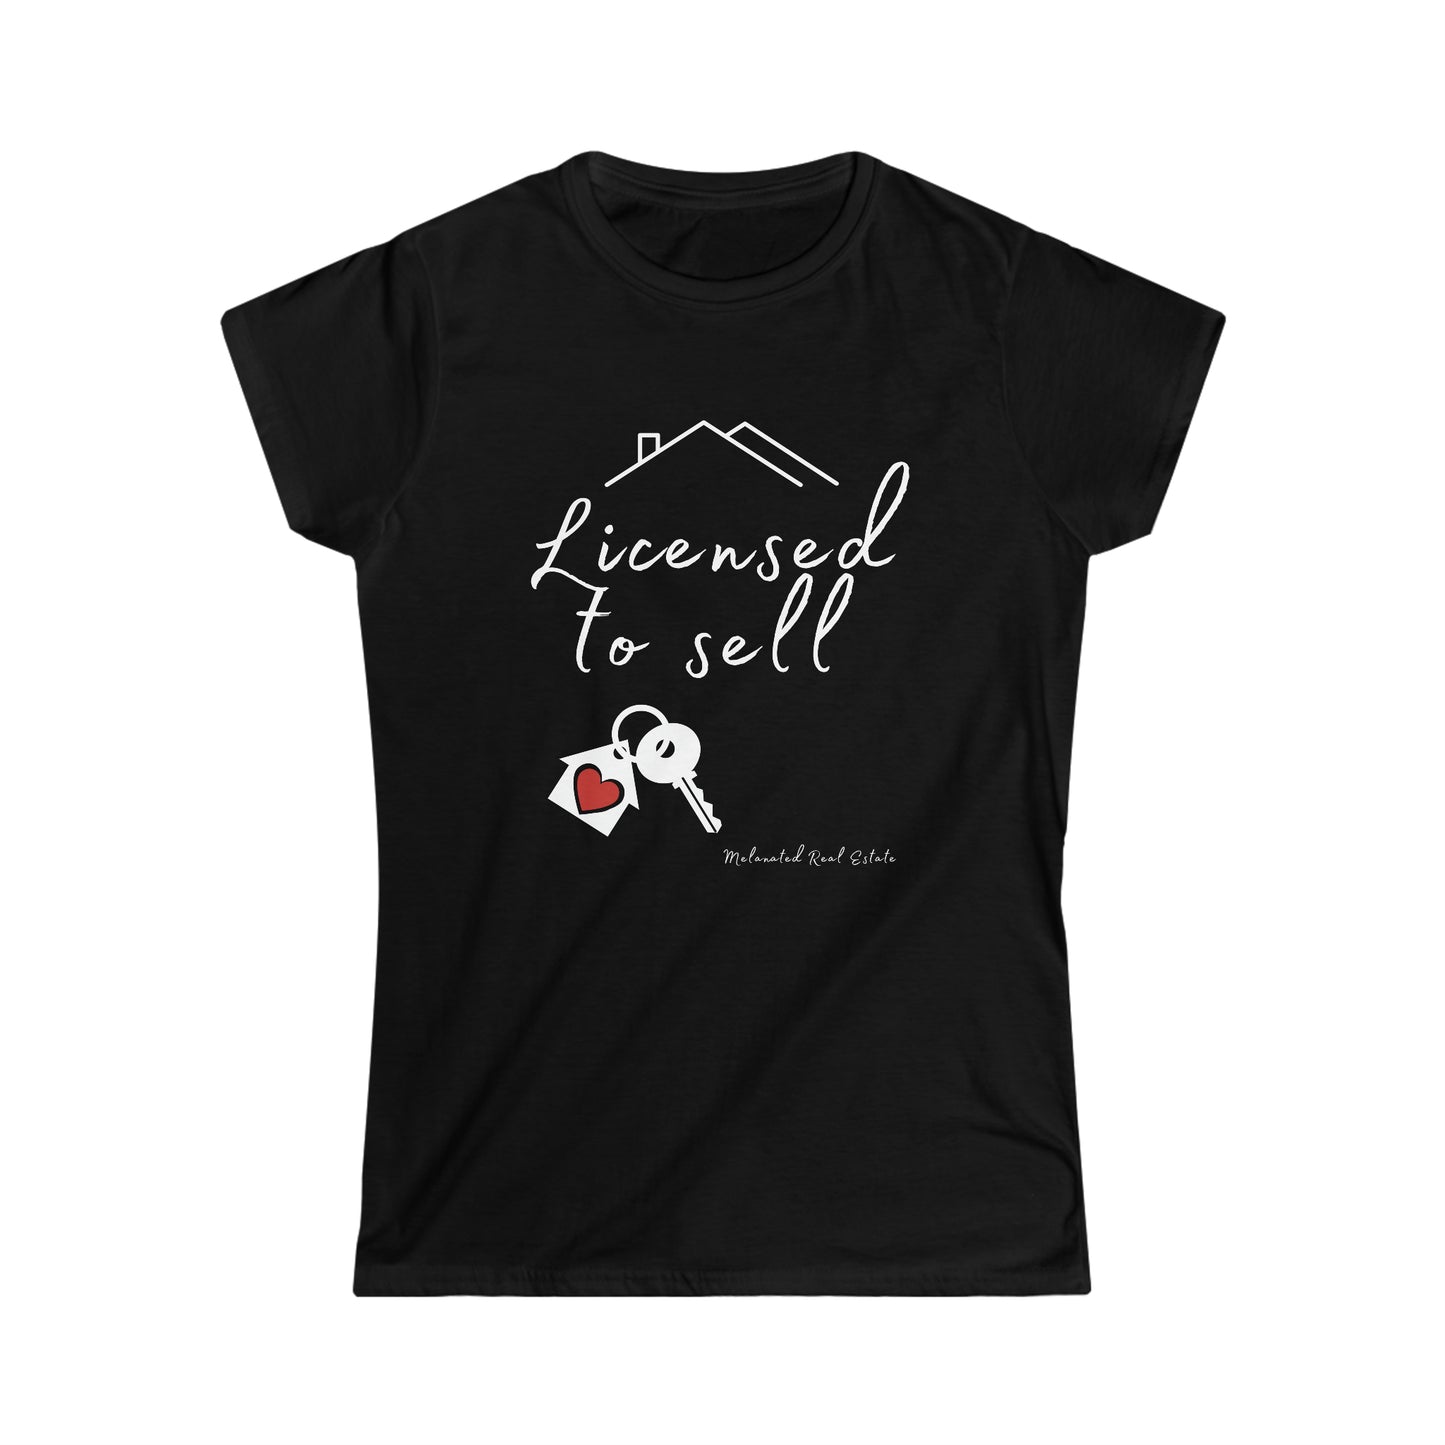 Licensed to Sell - Women's Softstyle Tee